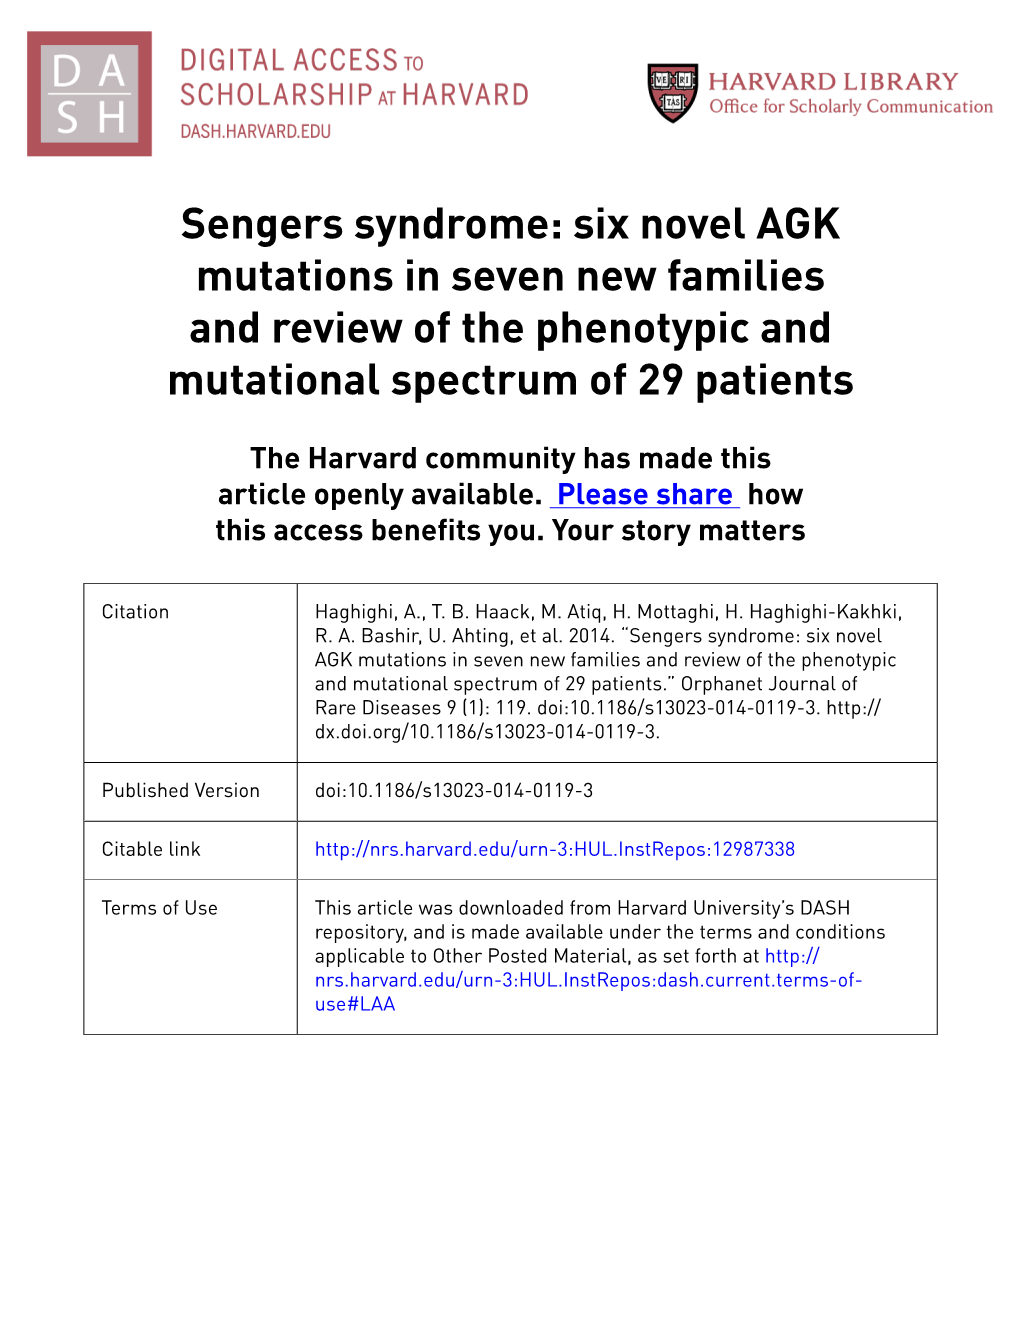 Sengers Syndrome: Six Novel AGK Mutations in Seven New Families and Review of the Phenotypic and Mutational Spectrum of 29 Patients